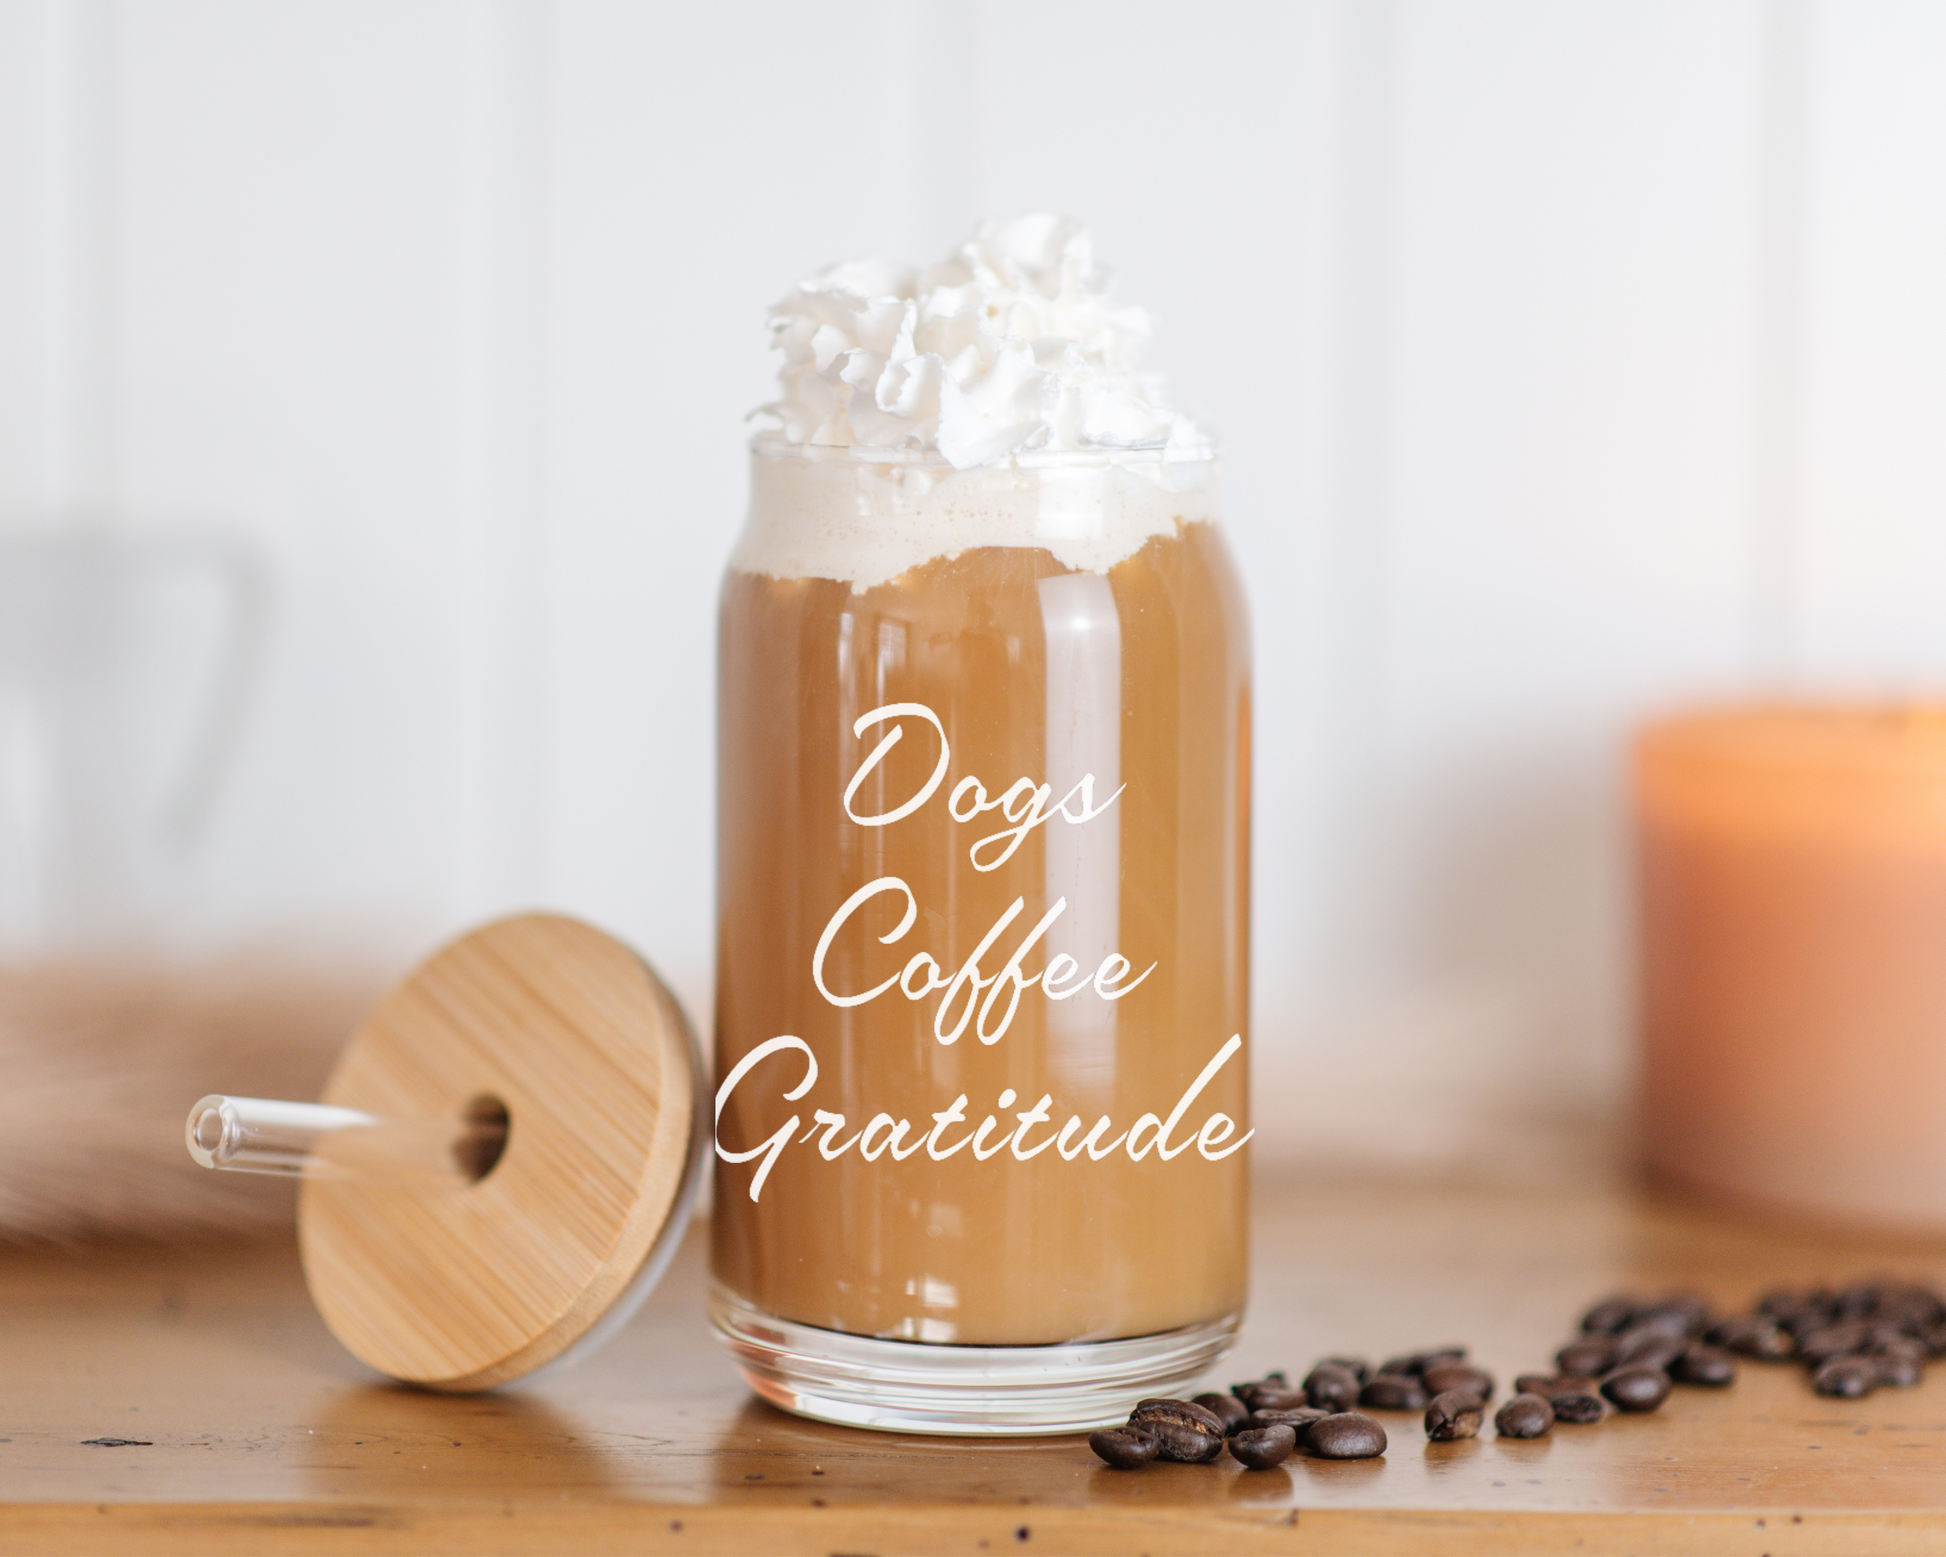 Dogs Coffee Gratitude coffee cup, coffee cups for dog lovers, iced coffee cups, beer can glass cups for dog lovers, dogs coffee gratitude